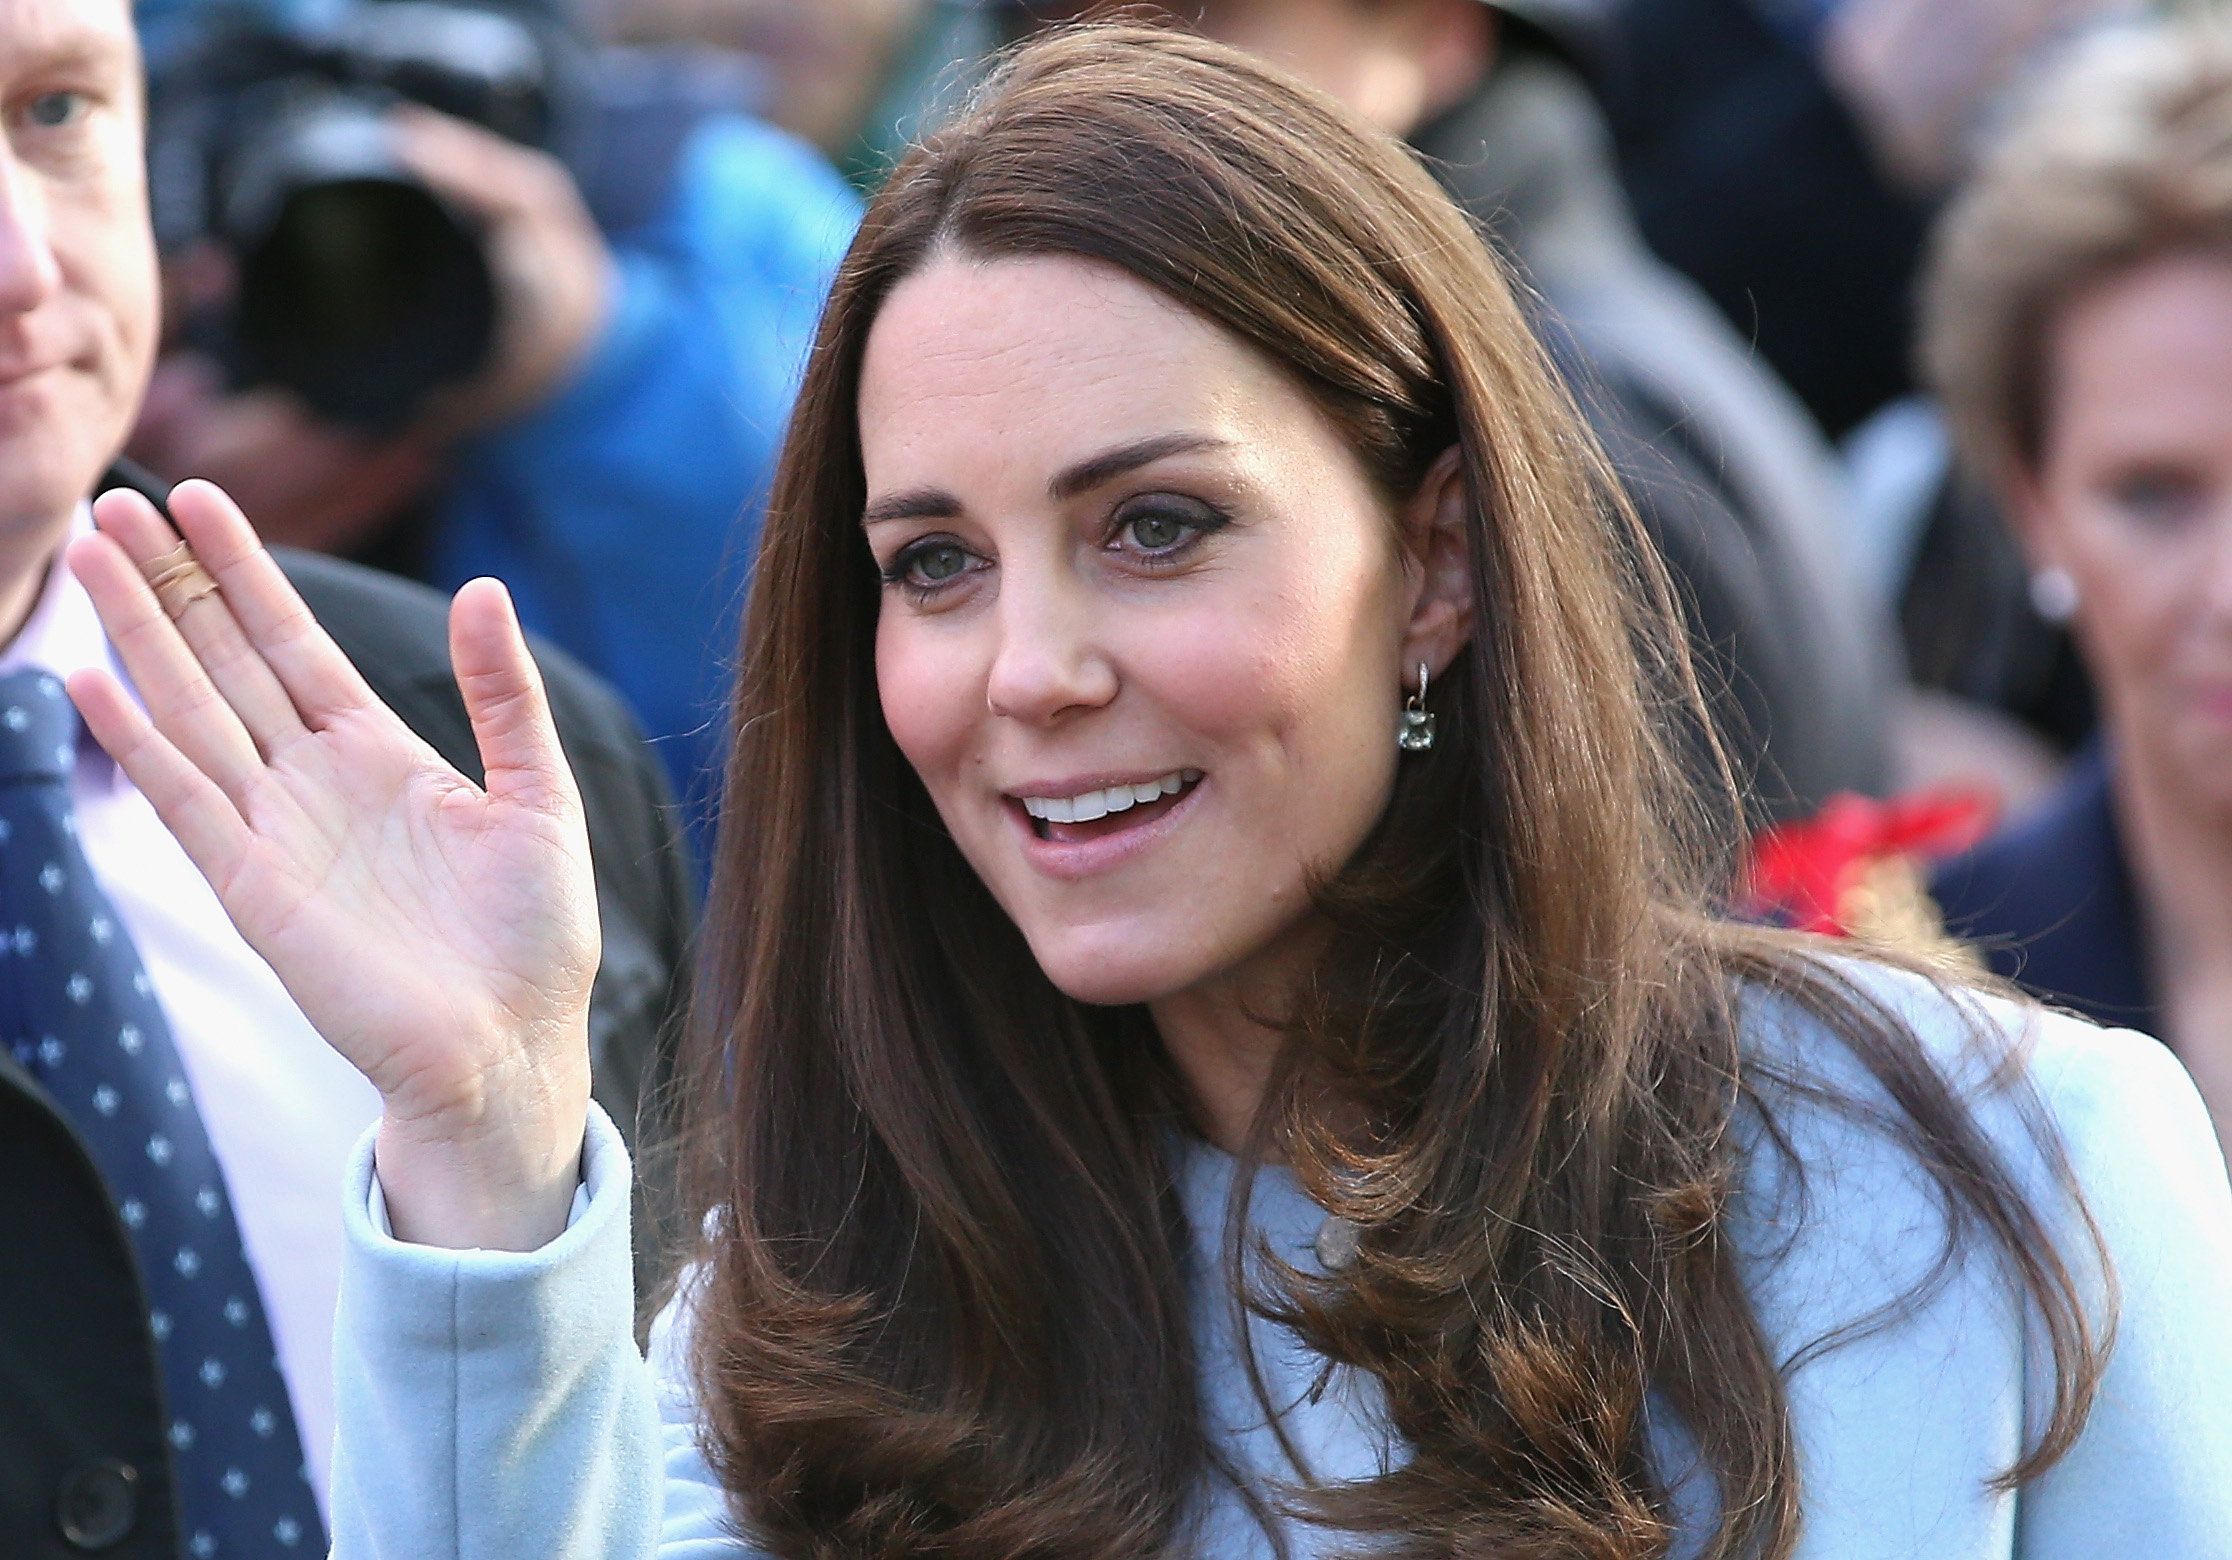 Kate Middleton Has a Girl: 5 Fast Facts You Need to Know